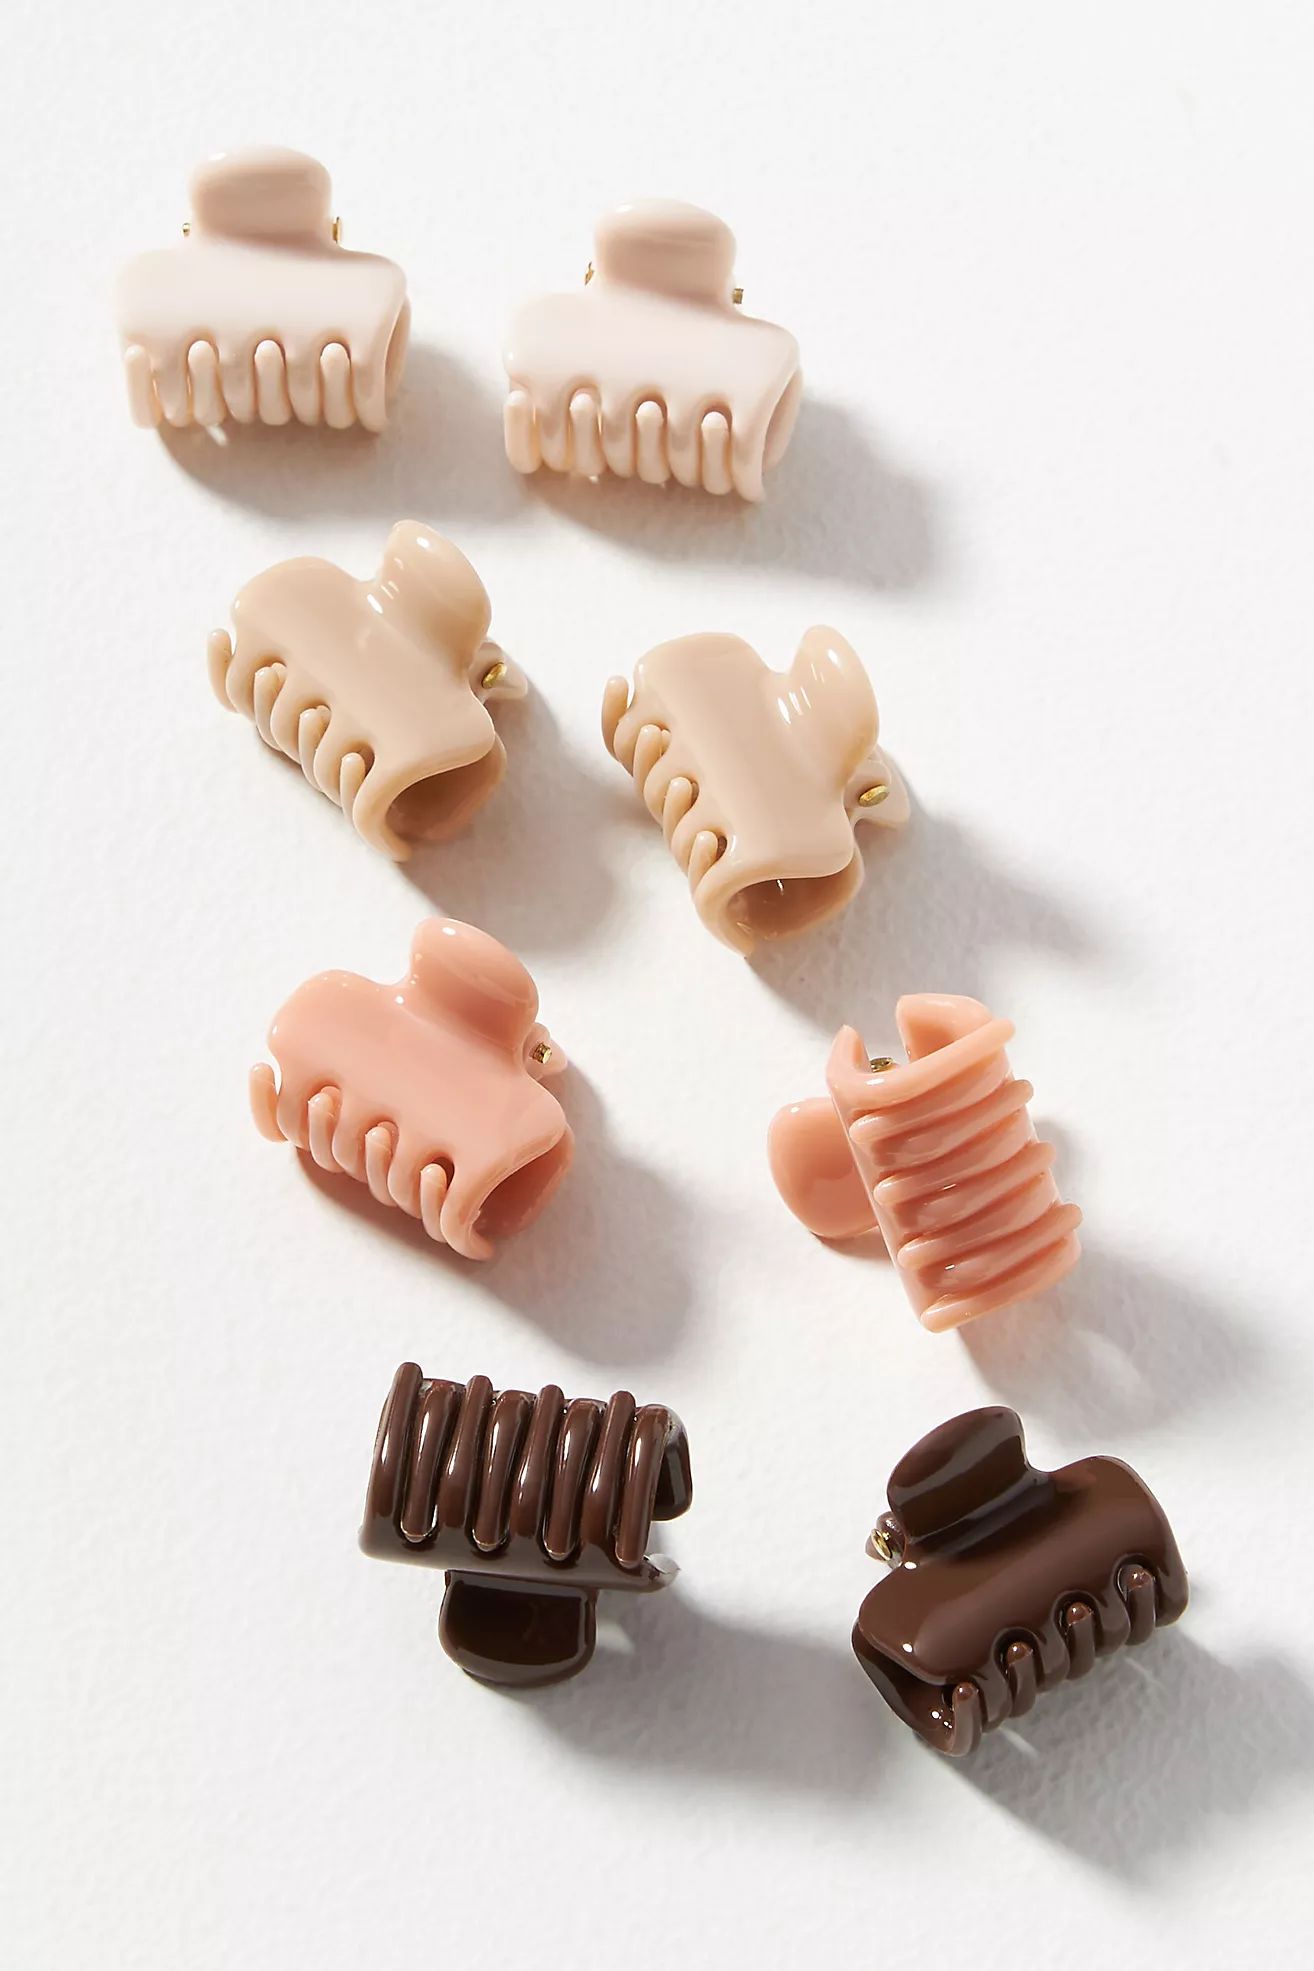 KITSCH Mini Puff Hair Claw Clips, Set of 8 | Anthropologie (US)